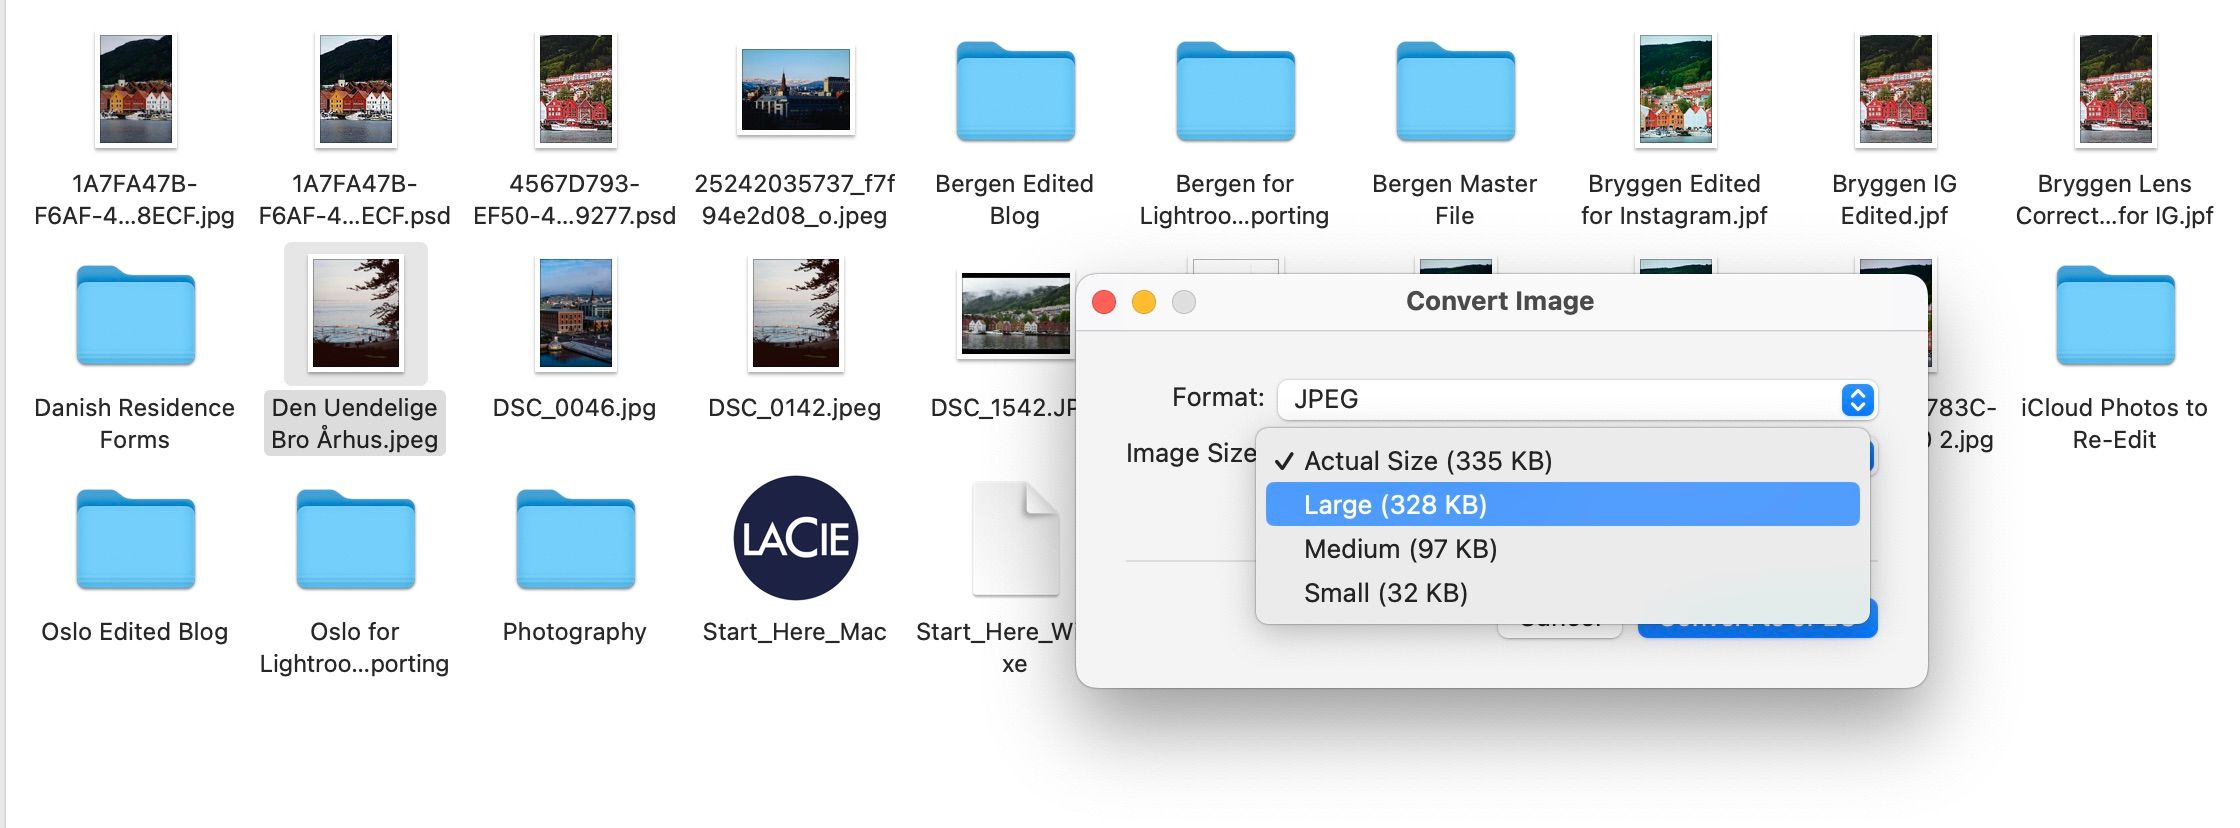 Convert an image to JPEG on your Mac